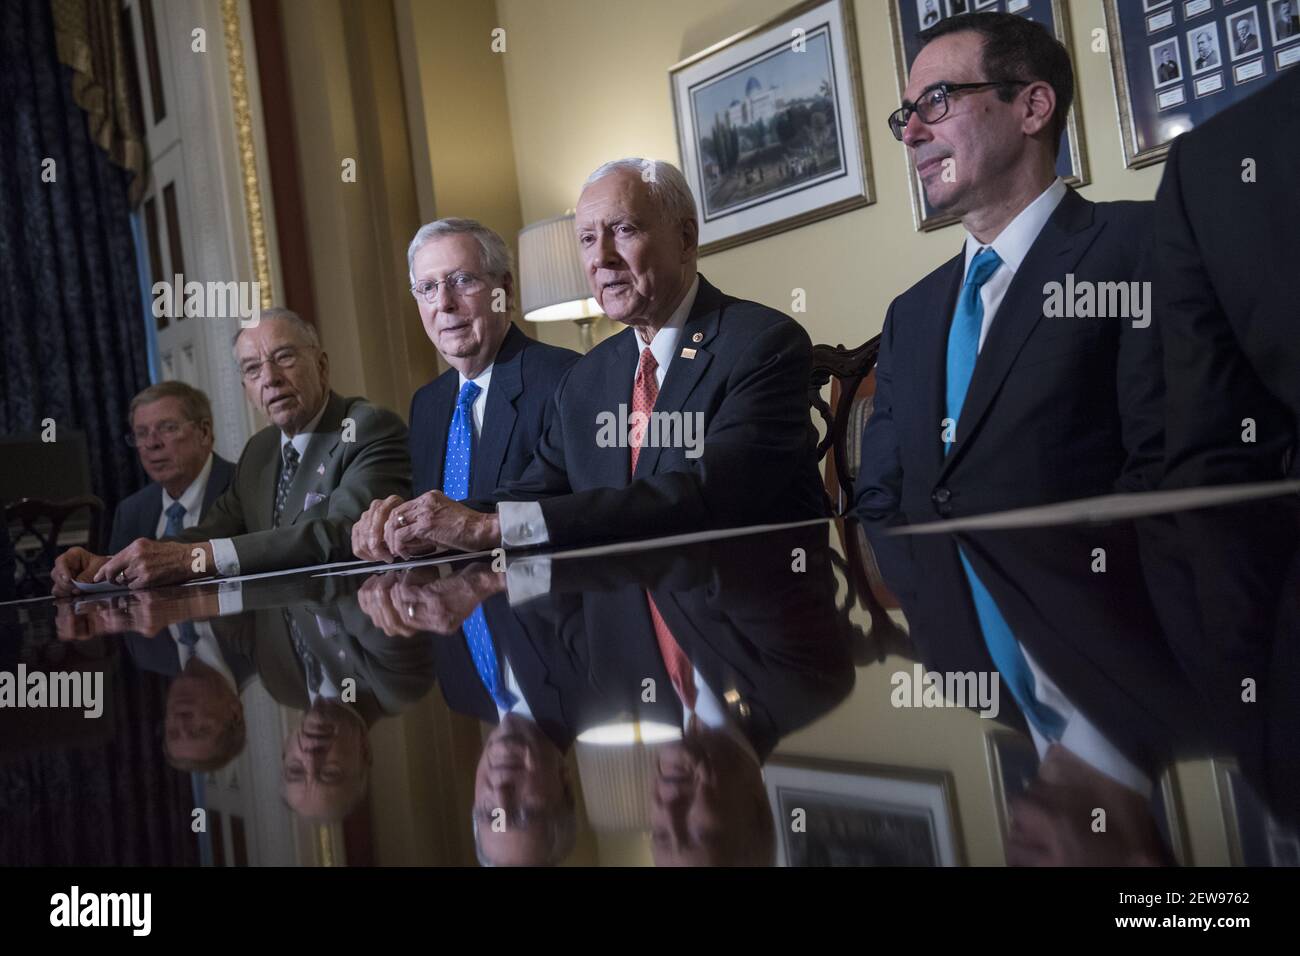 UNITED STATES - NOVEMBER 09: From left, Sens. Johnny Isakson, R-Ga., Charles Grassley, R-Iowa, Senate Majority Leader Mitch McConnell, R-Ky., Senate Finance Committee Chairman Orrin Hatch, R-Utah, and Treasury Secretary Steve Mnuchin, are pictured before a meeting in the Capitol on the Senate Republicans' tax reform plan on November 9, 2017. (Photo By Tom Williams/CQ Roll Call) Stock Photo